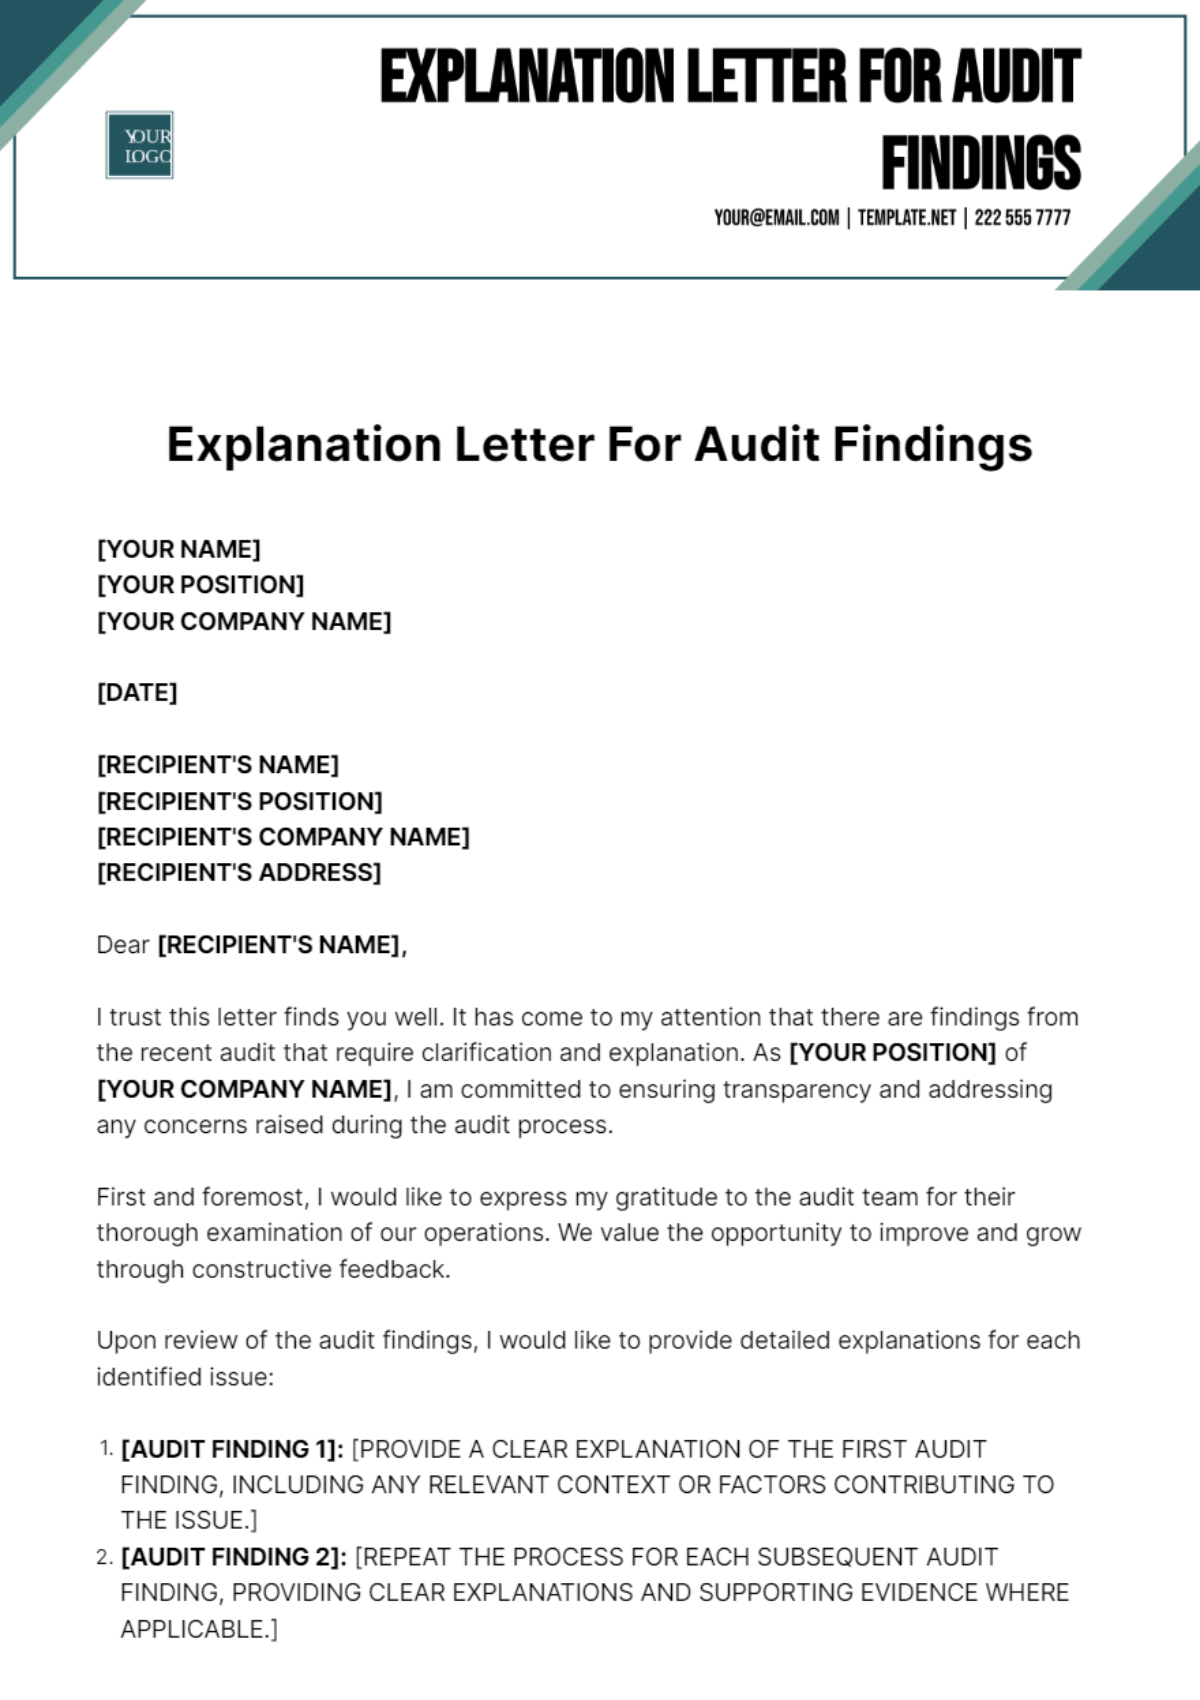 Explanation Letter For Audit Findings Template